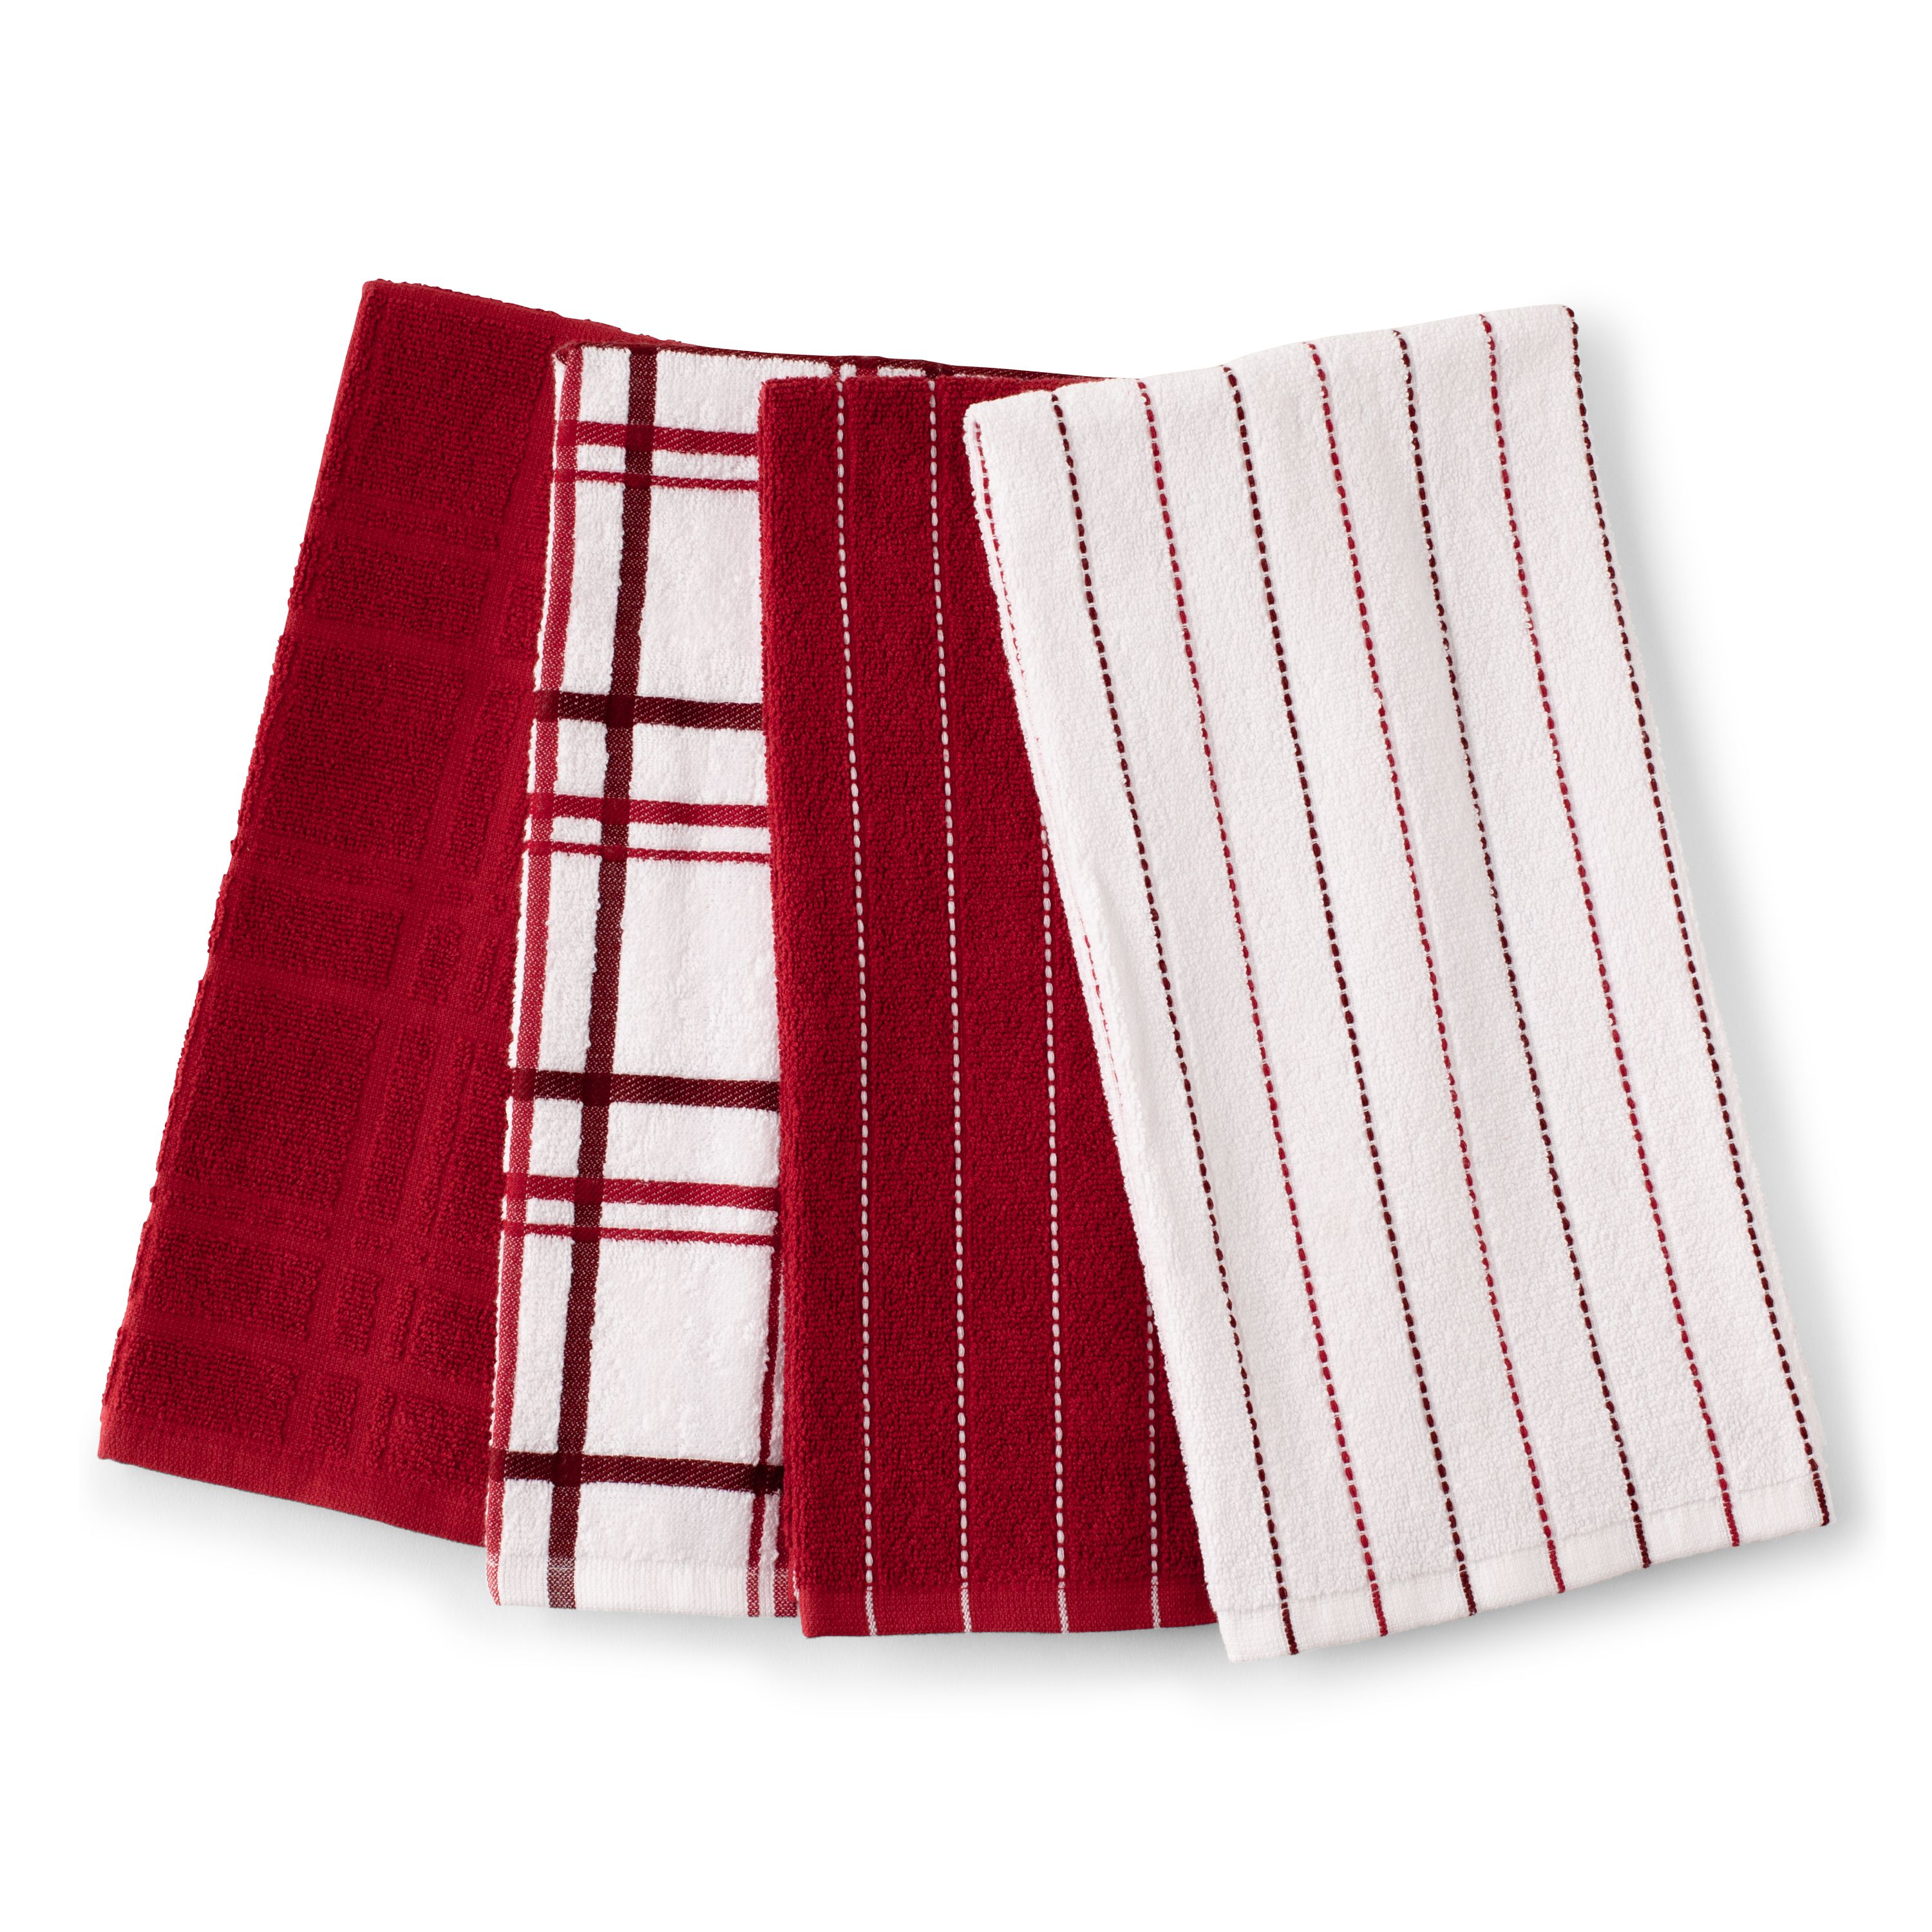 Better Homes & Gardens Kitchen Towel Set, Red, 4 Count - image 1 of 6